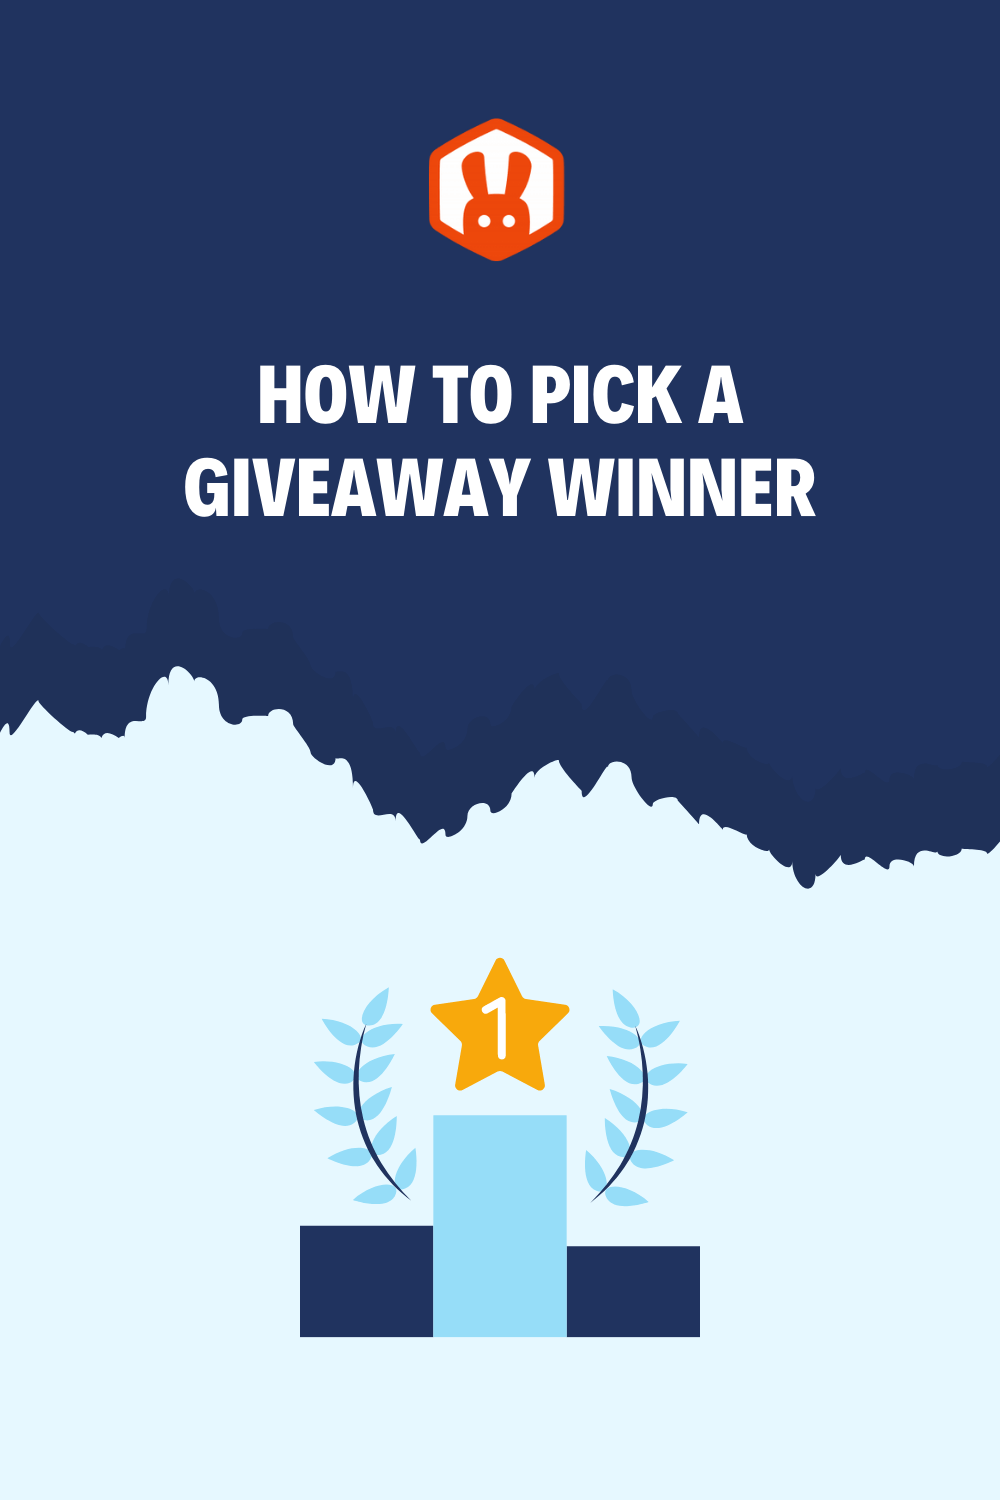 How To Pick A Winner For A Giveaway Randomly + 5 More Ways